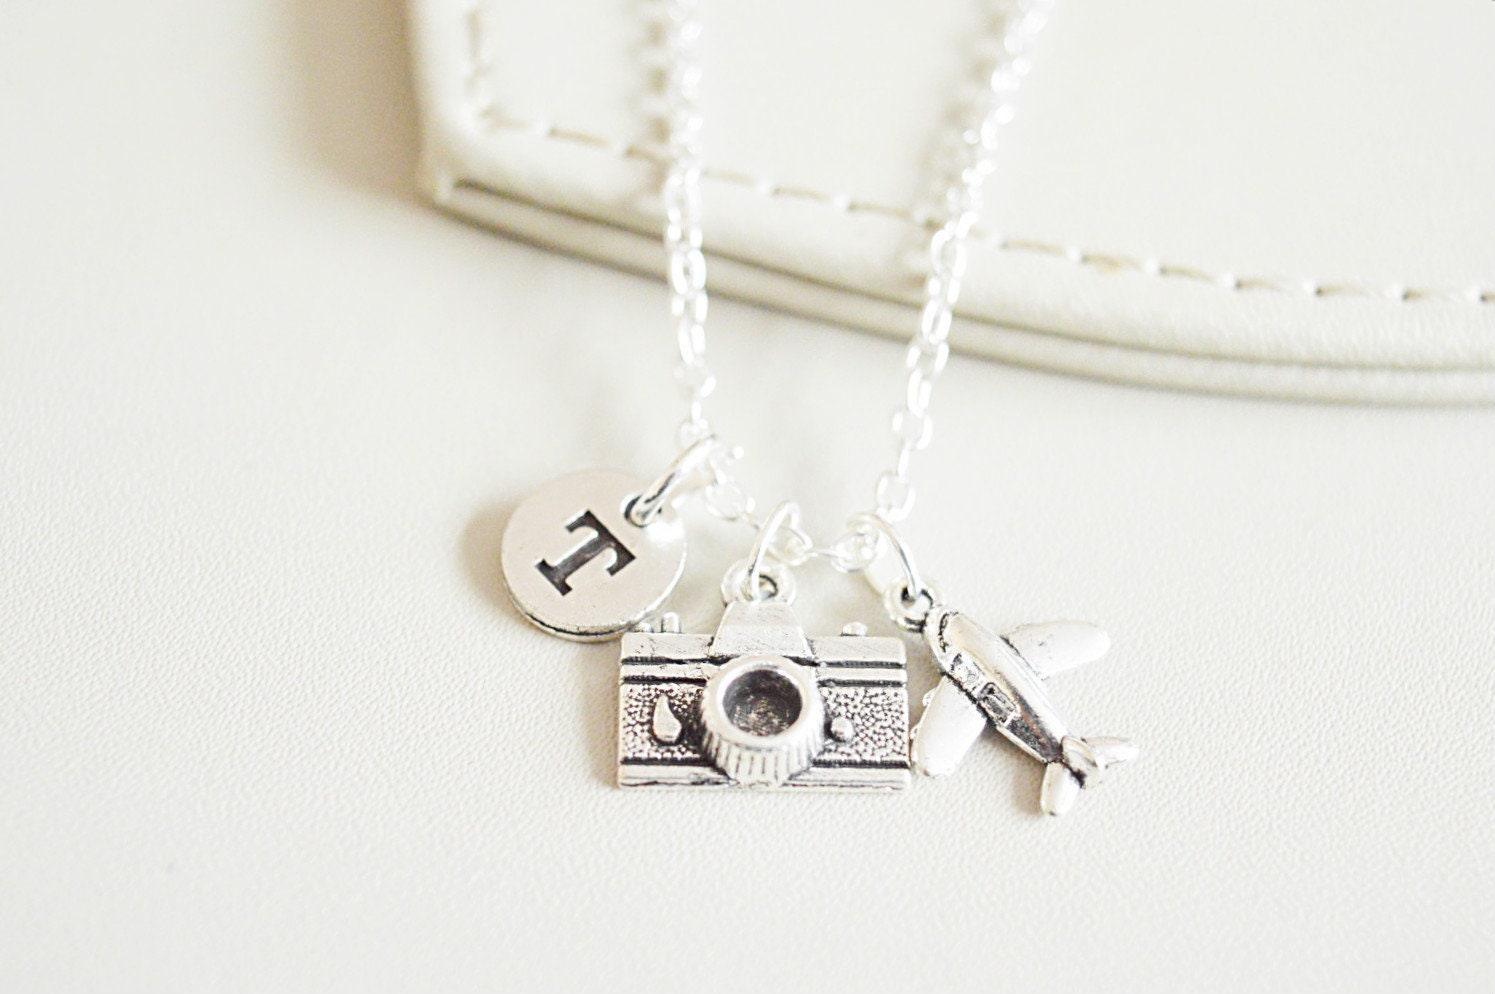 Travel Necklace, Travel Jewelry, Travel Buddy, Camera Necklace, Camera Charm, Journalist Gift, Airplane,Air Plane, Traveller, Photographer